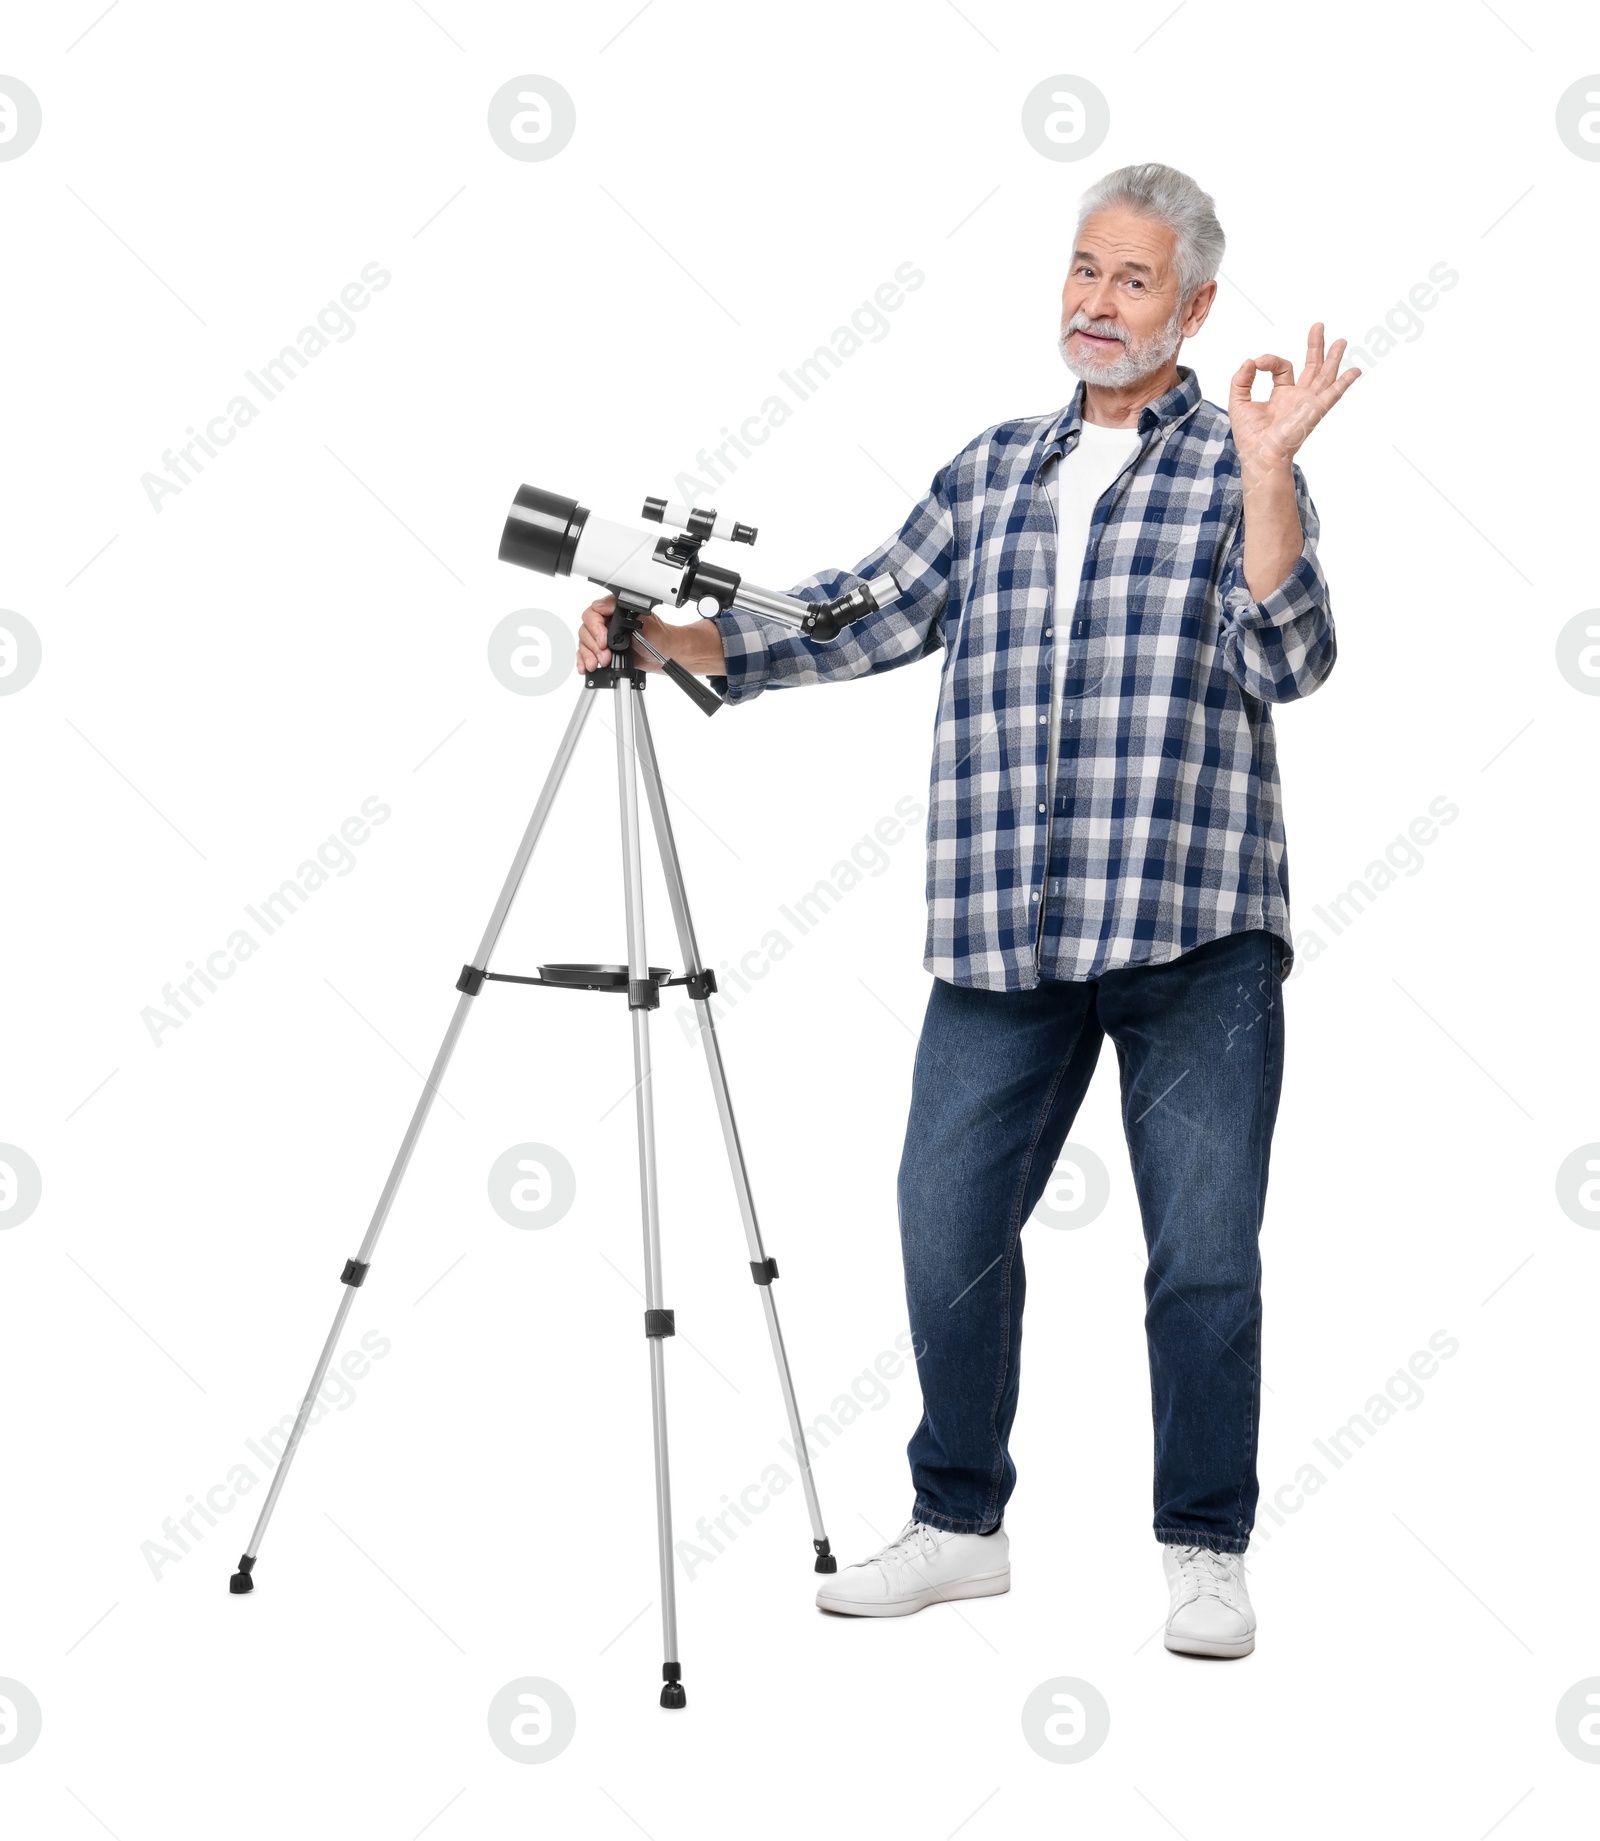 Photo of Senior astronomer with telescope showing okay gesture on white background